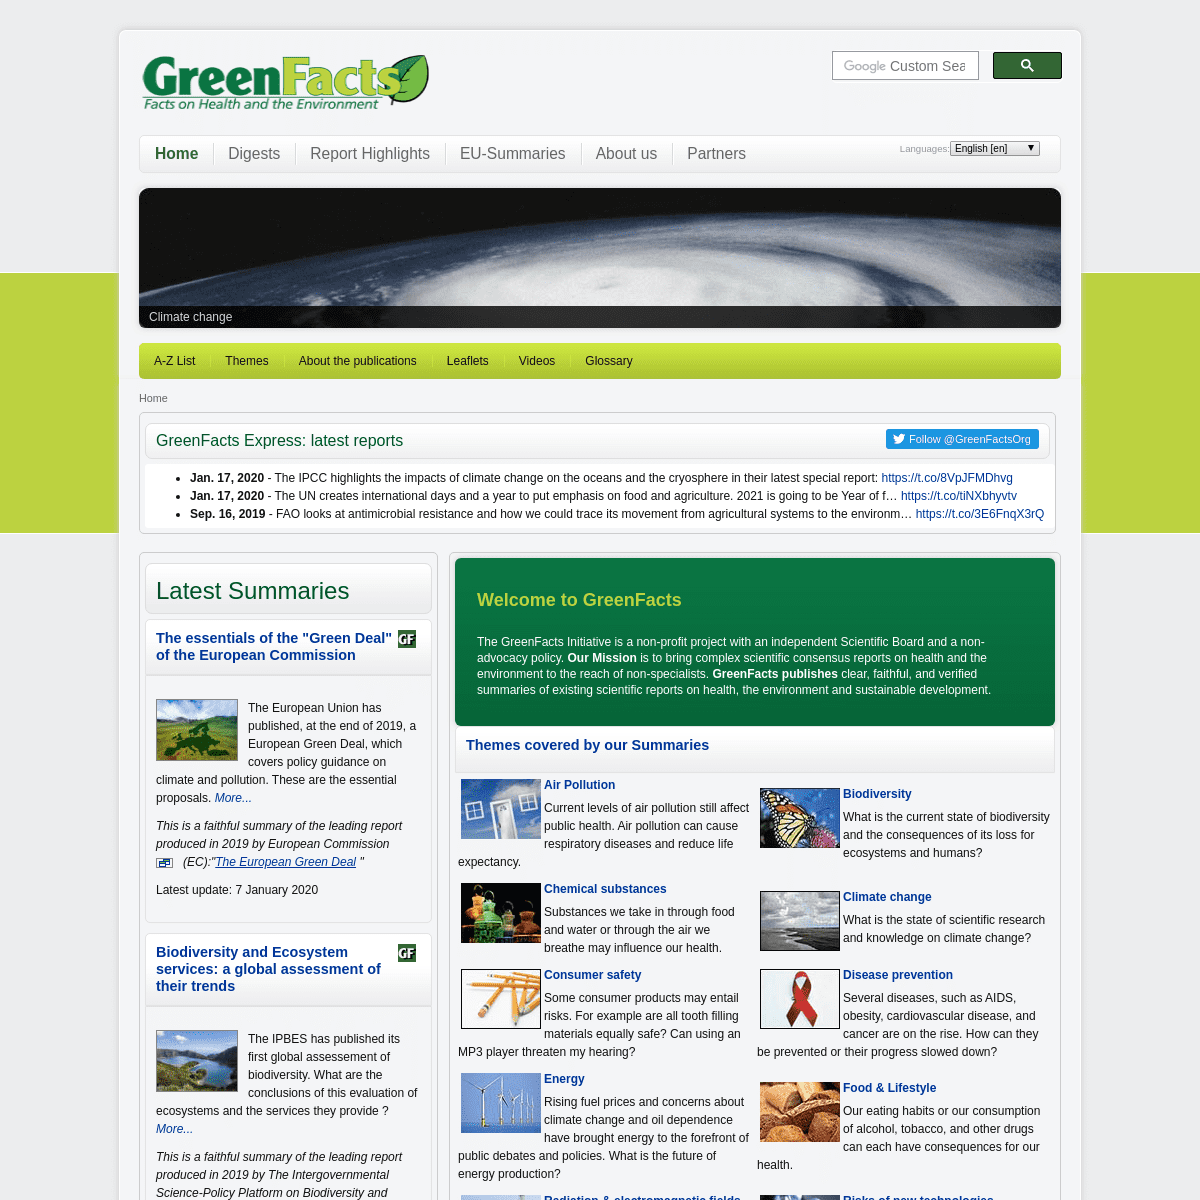 A complete backup of greenfacts.org